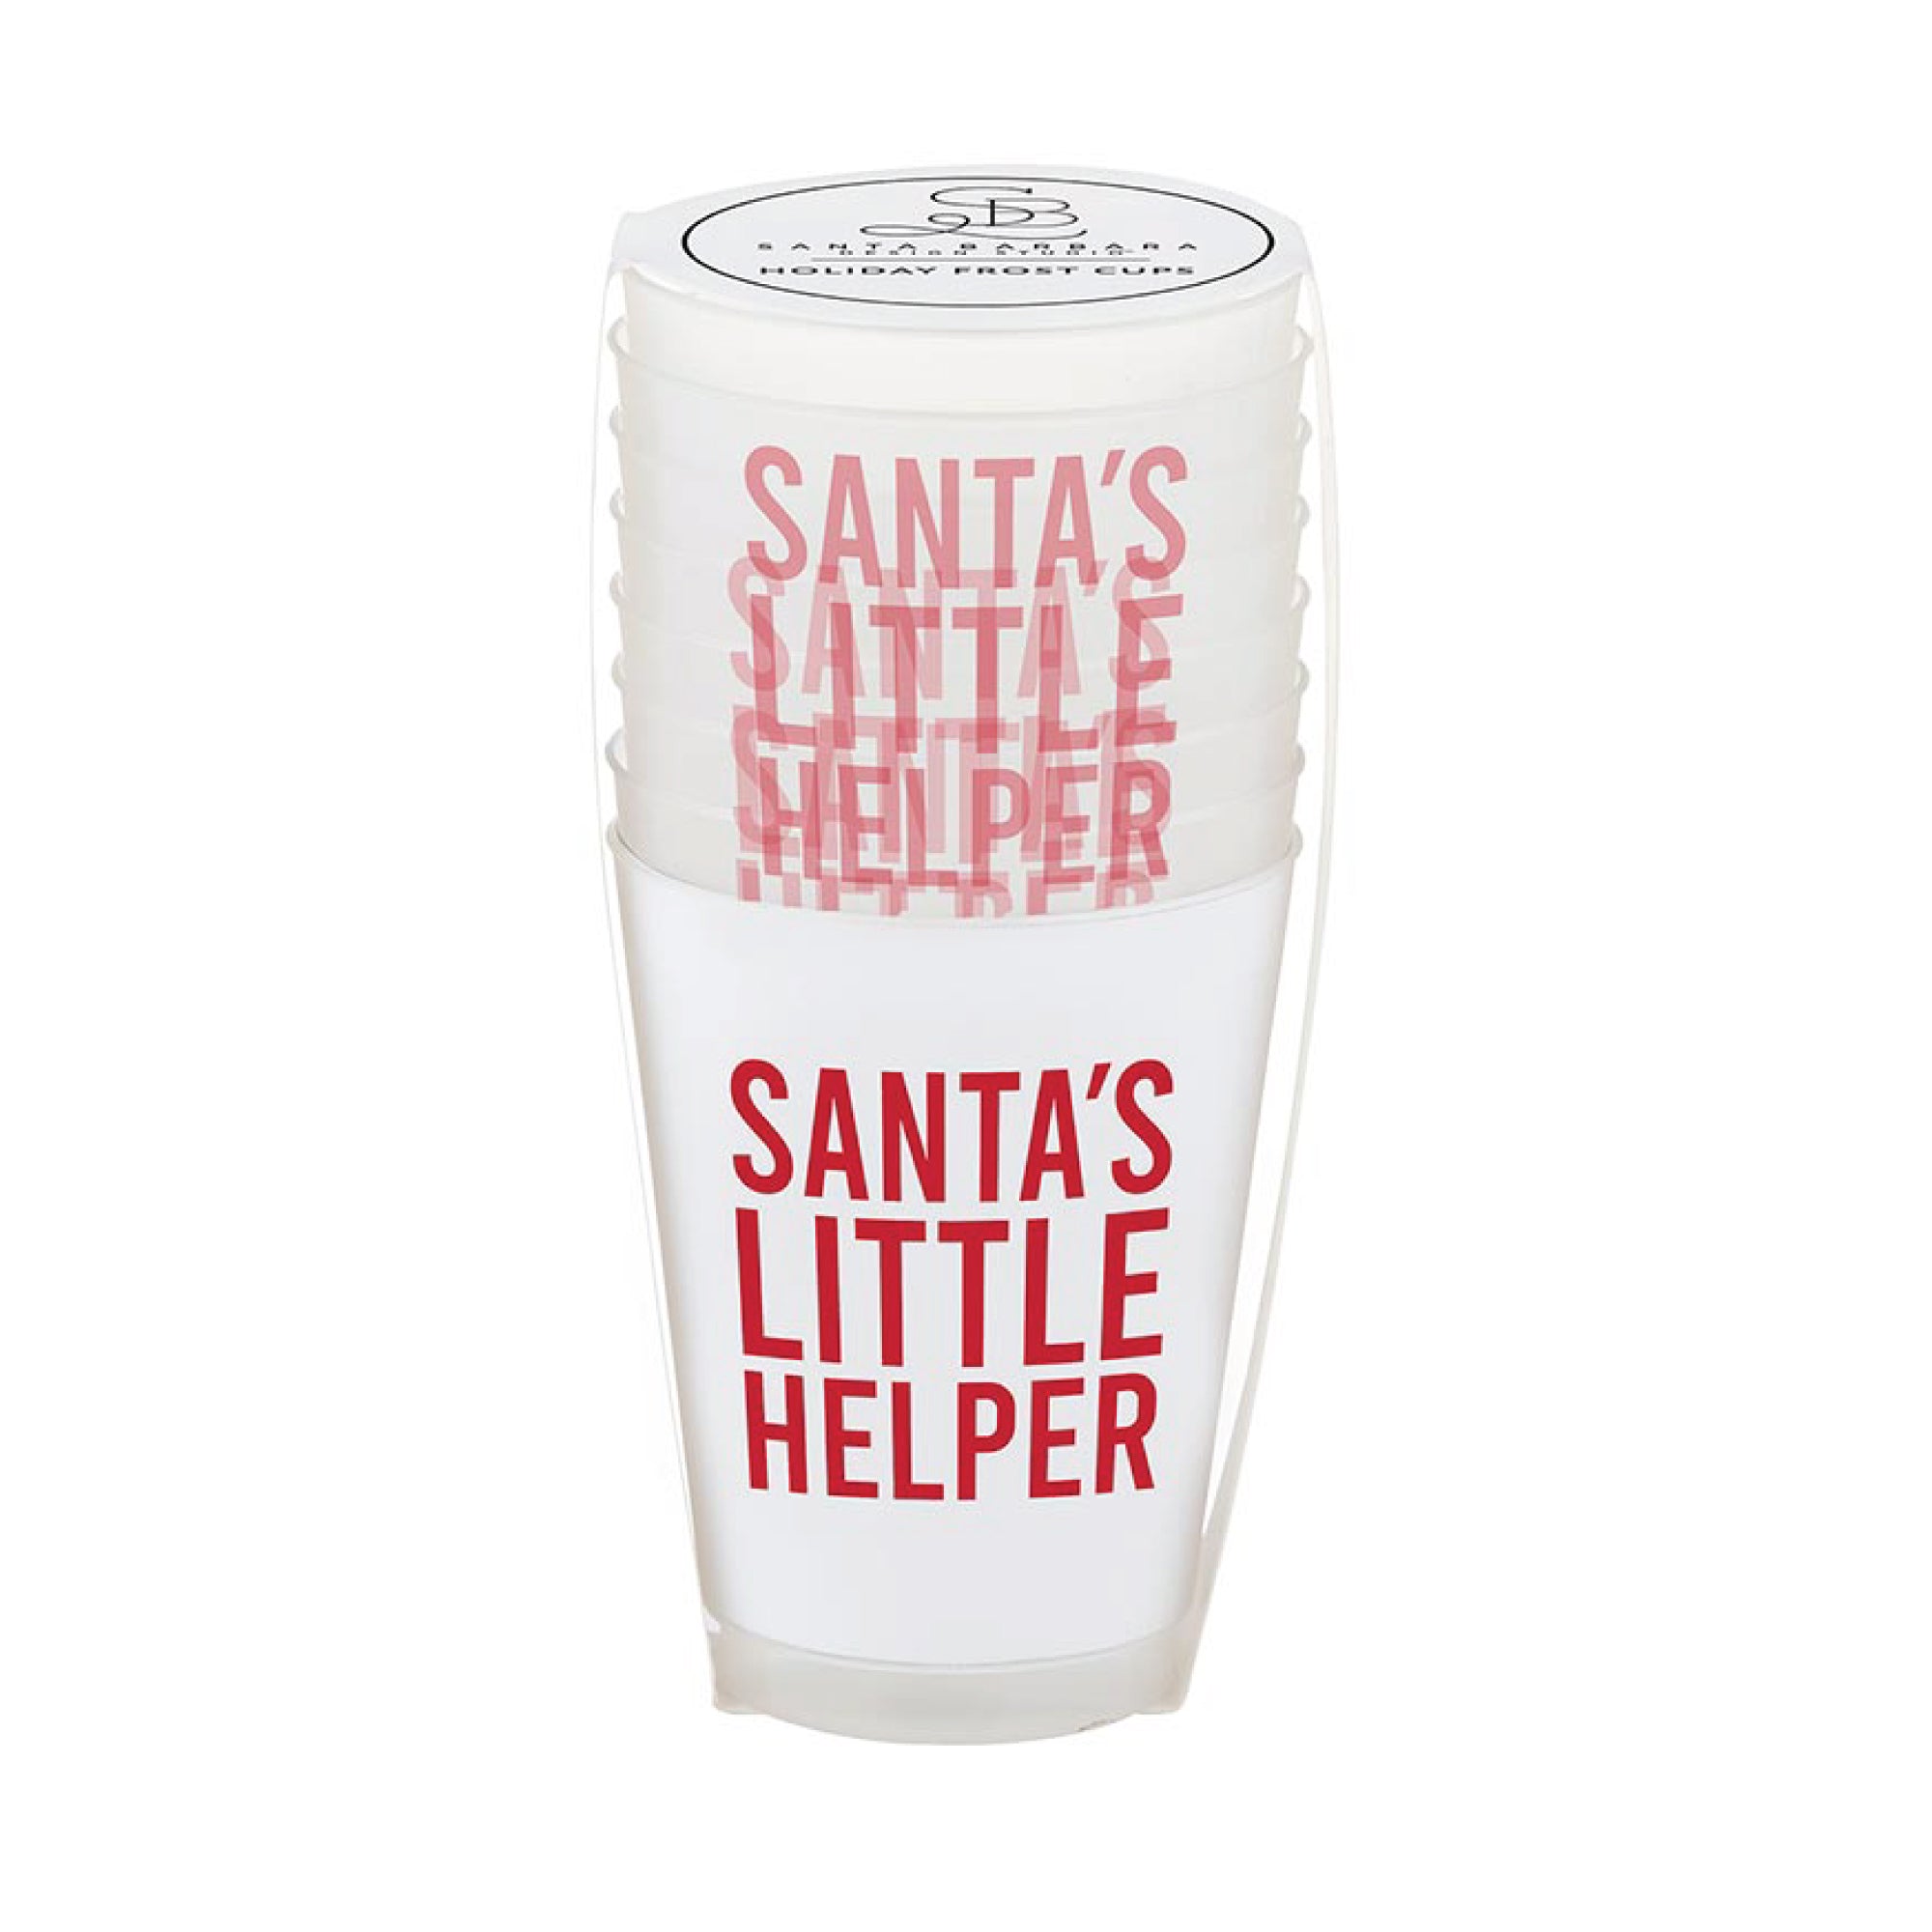 Santa's Little Helper Frosted Cups 8ct | The Party Darling